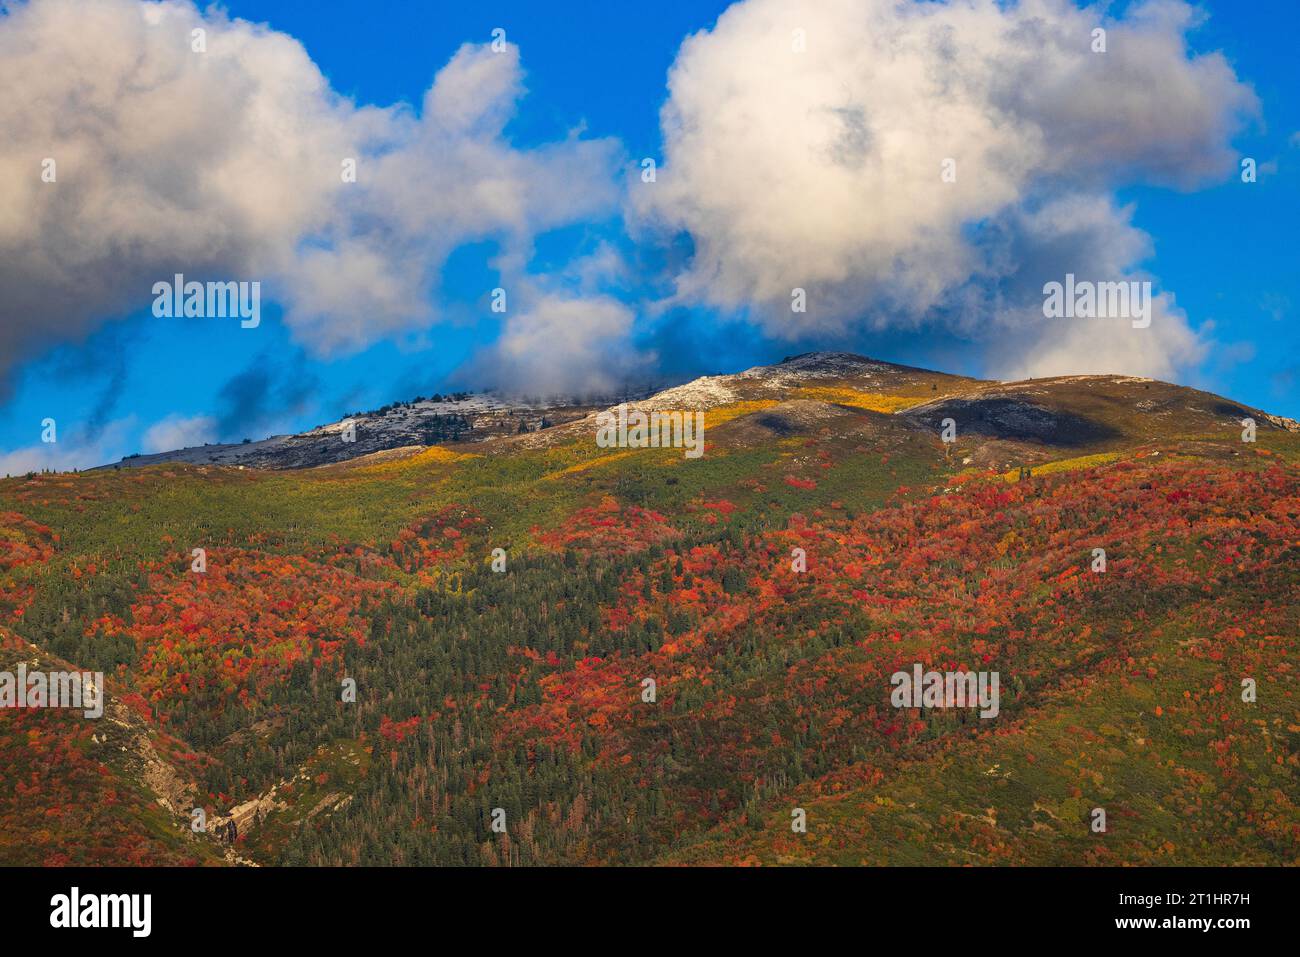 This is a view of the Wasatch Mountains east of Farmington, Utah with fall colors: Reds lower, yellows higher and a dusting of snow on top. Stock Photo